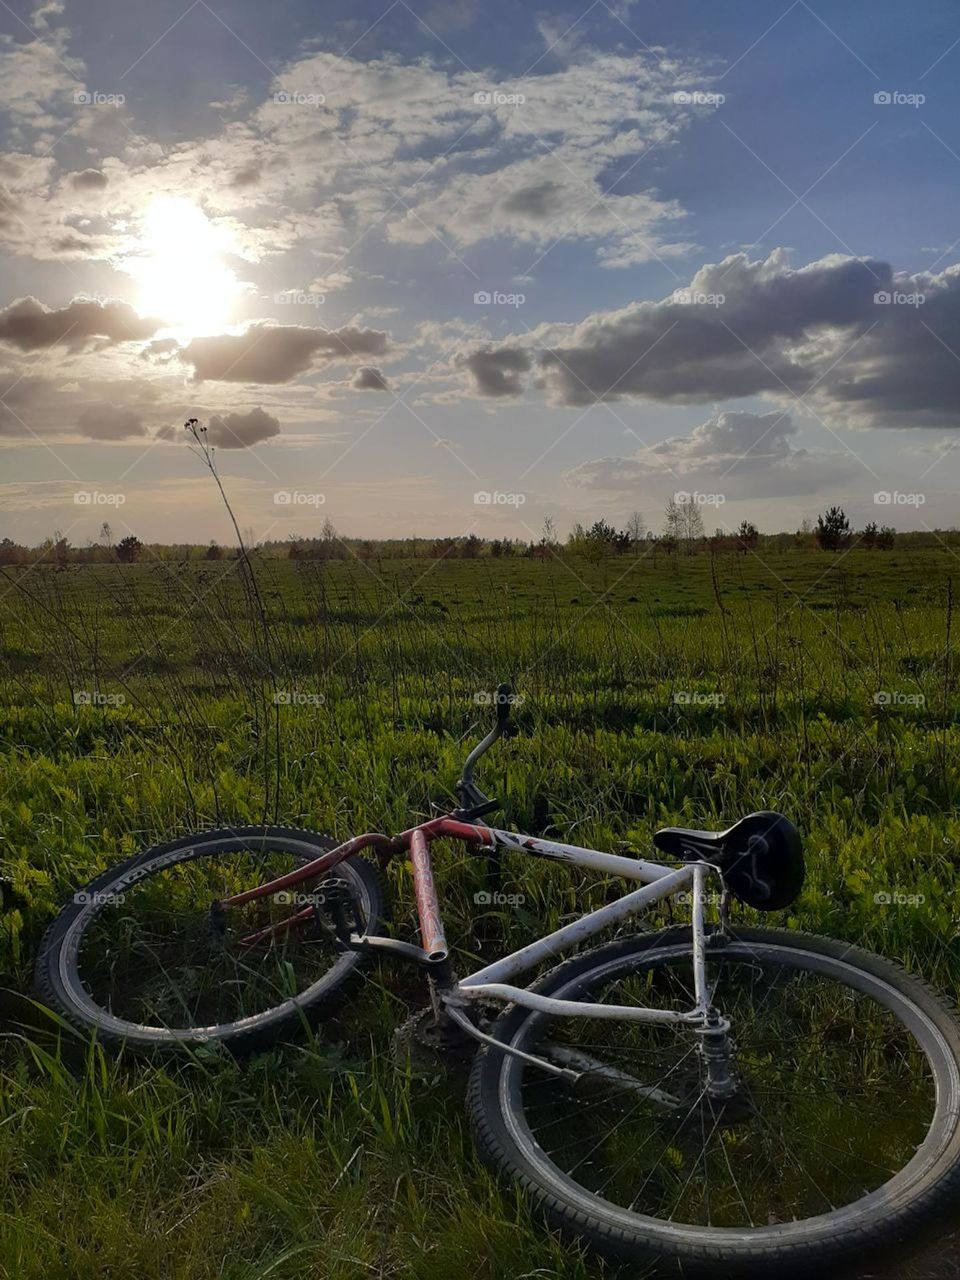 Triangular bicycle frame in the grass